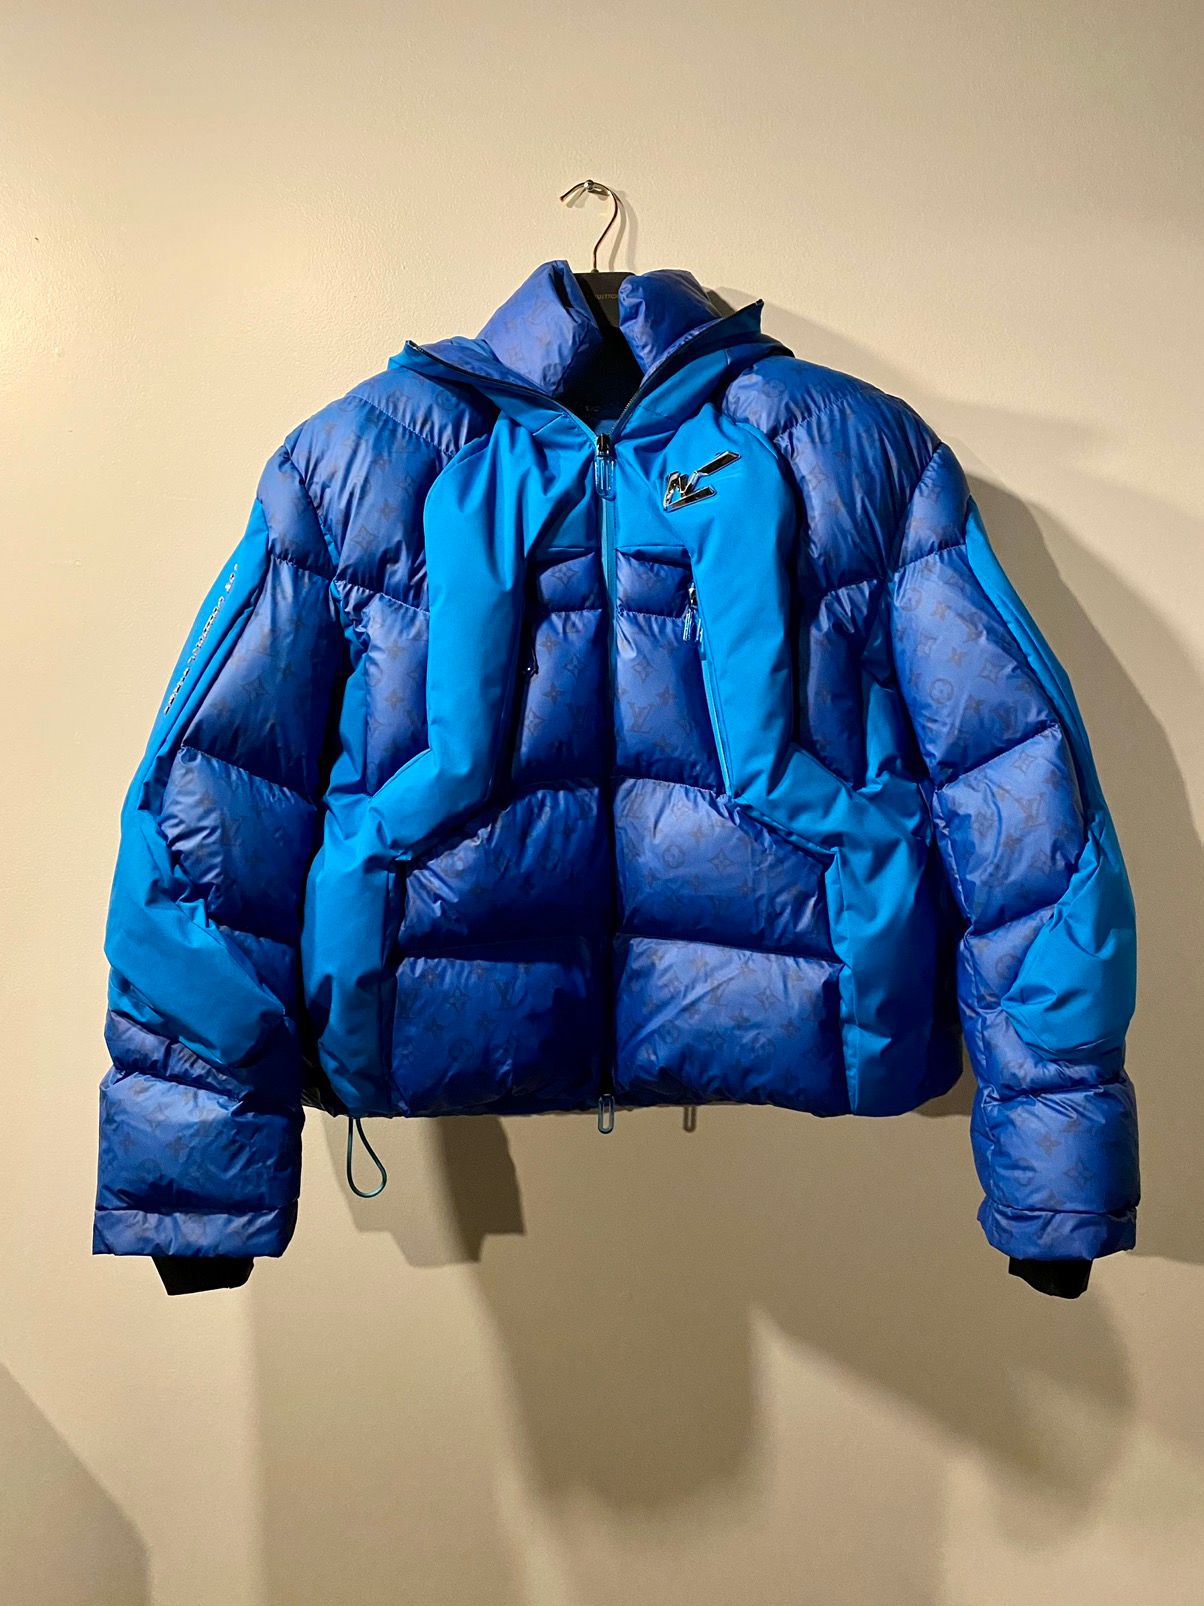 Louis Vuitton 2054 Heat Reactive Puffer. Worth the price? Let us know